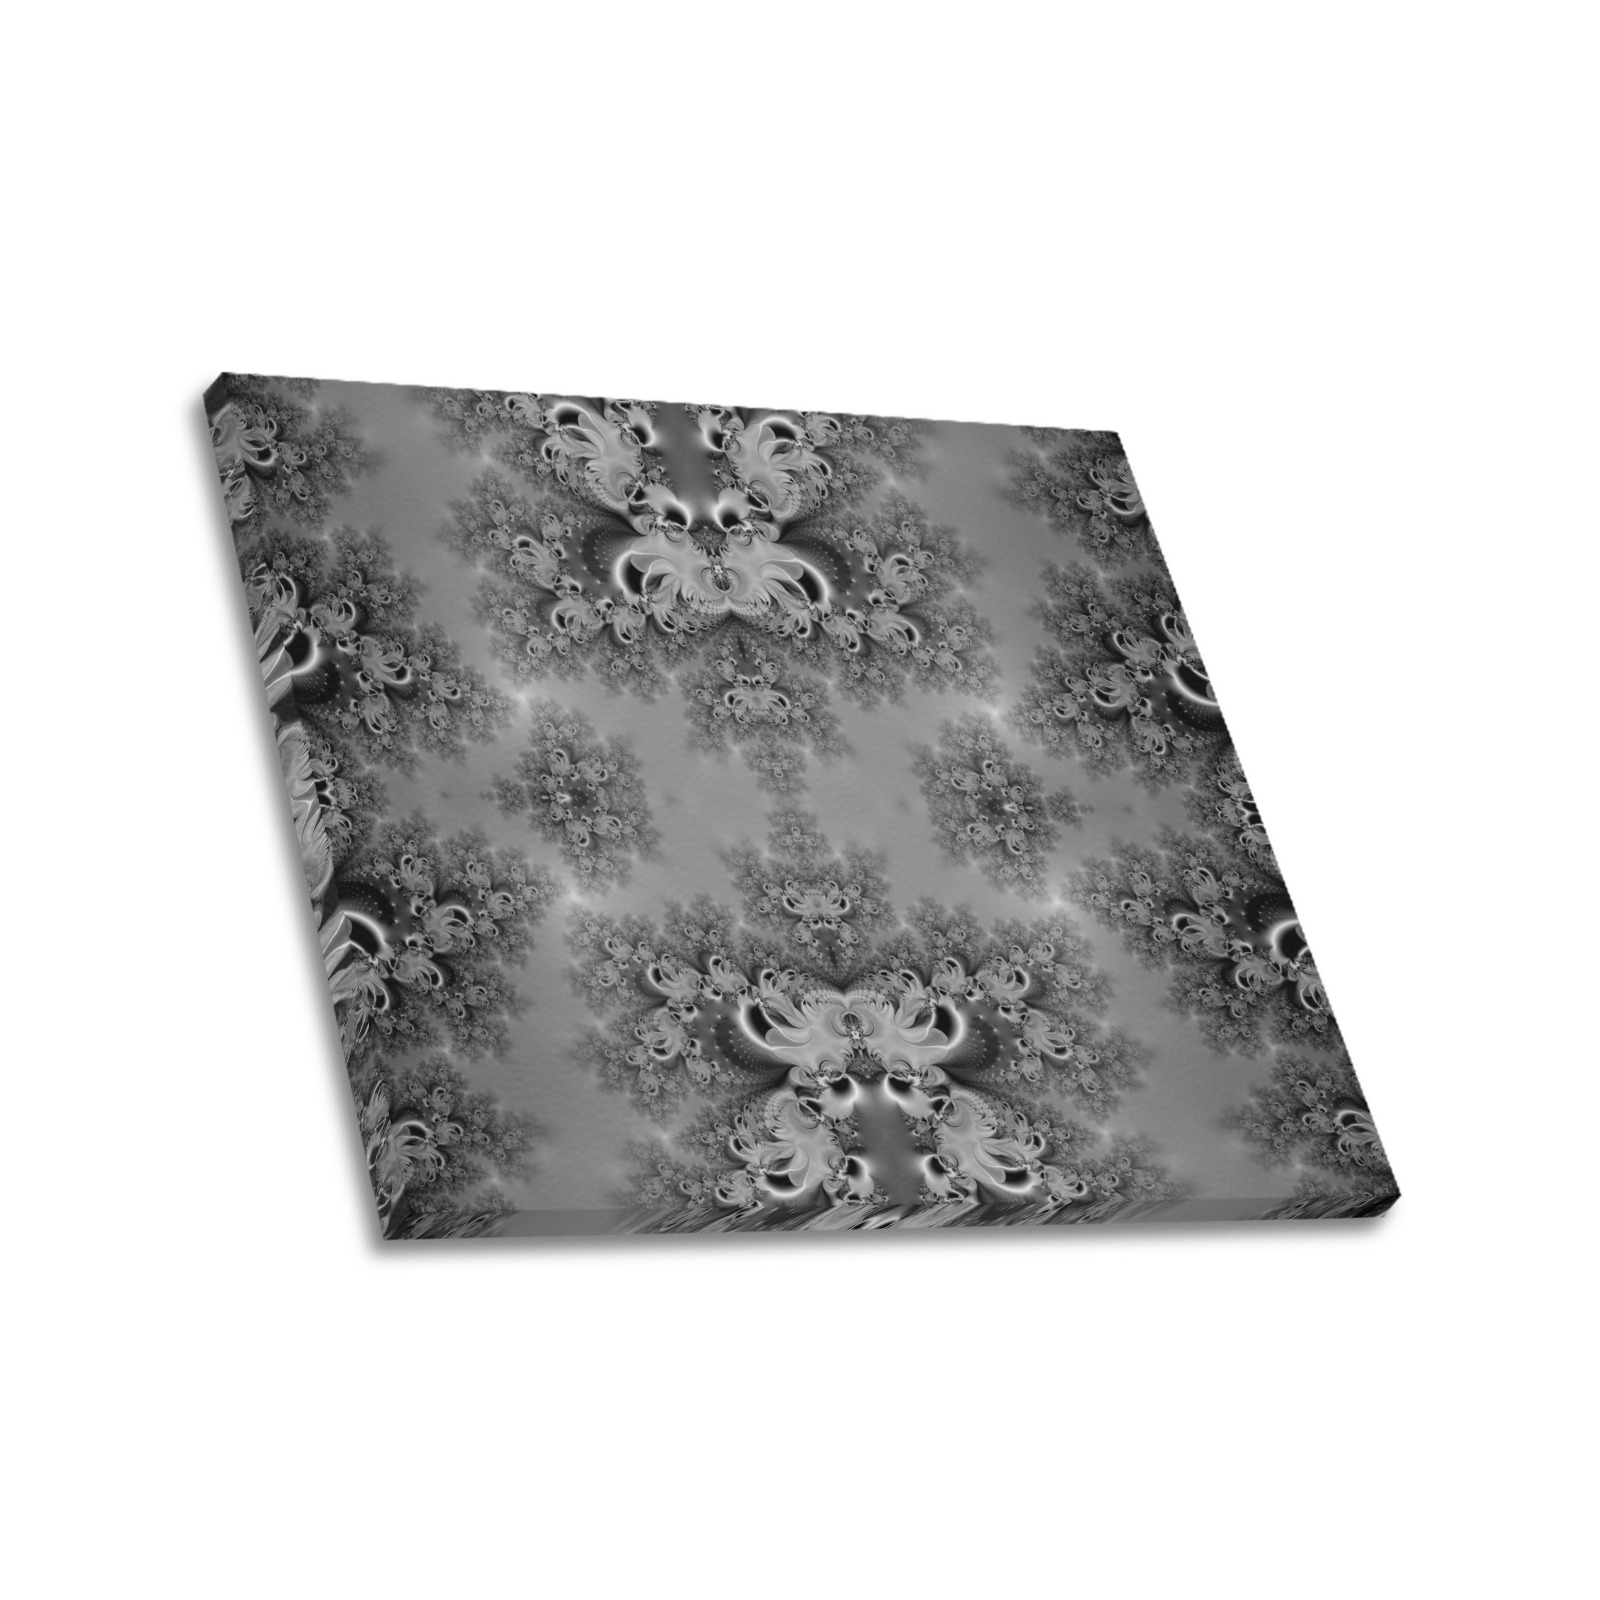 Cloudy Day in the Garden Frost Fractal Frame Canvas Print 24"x20"